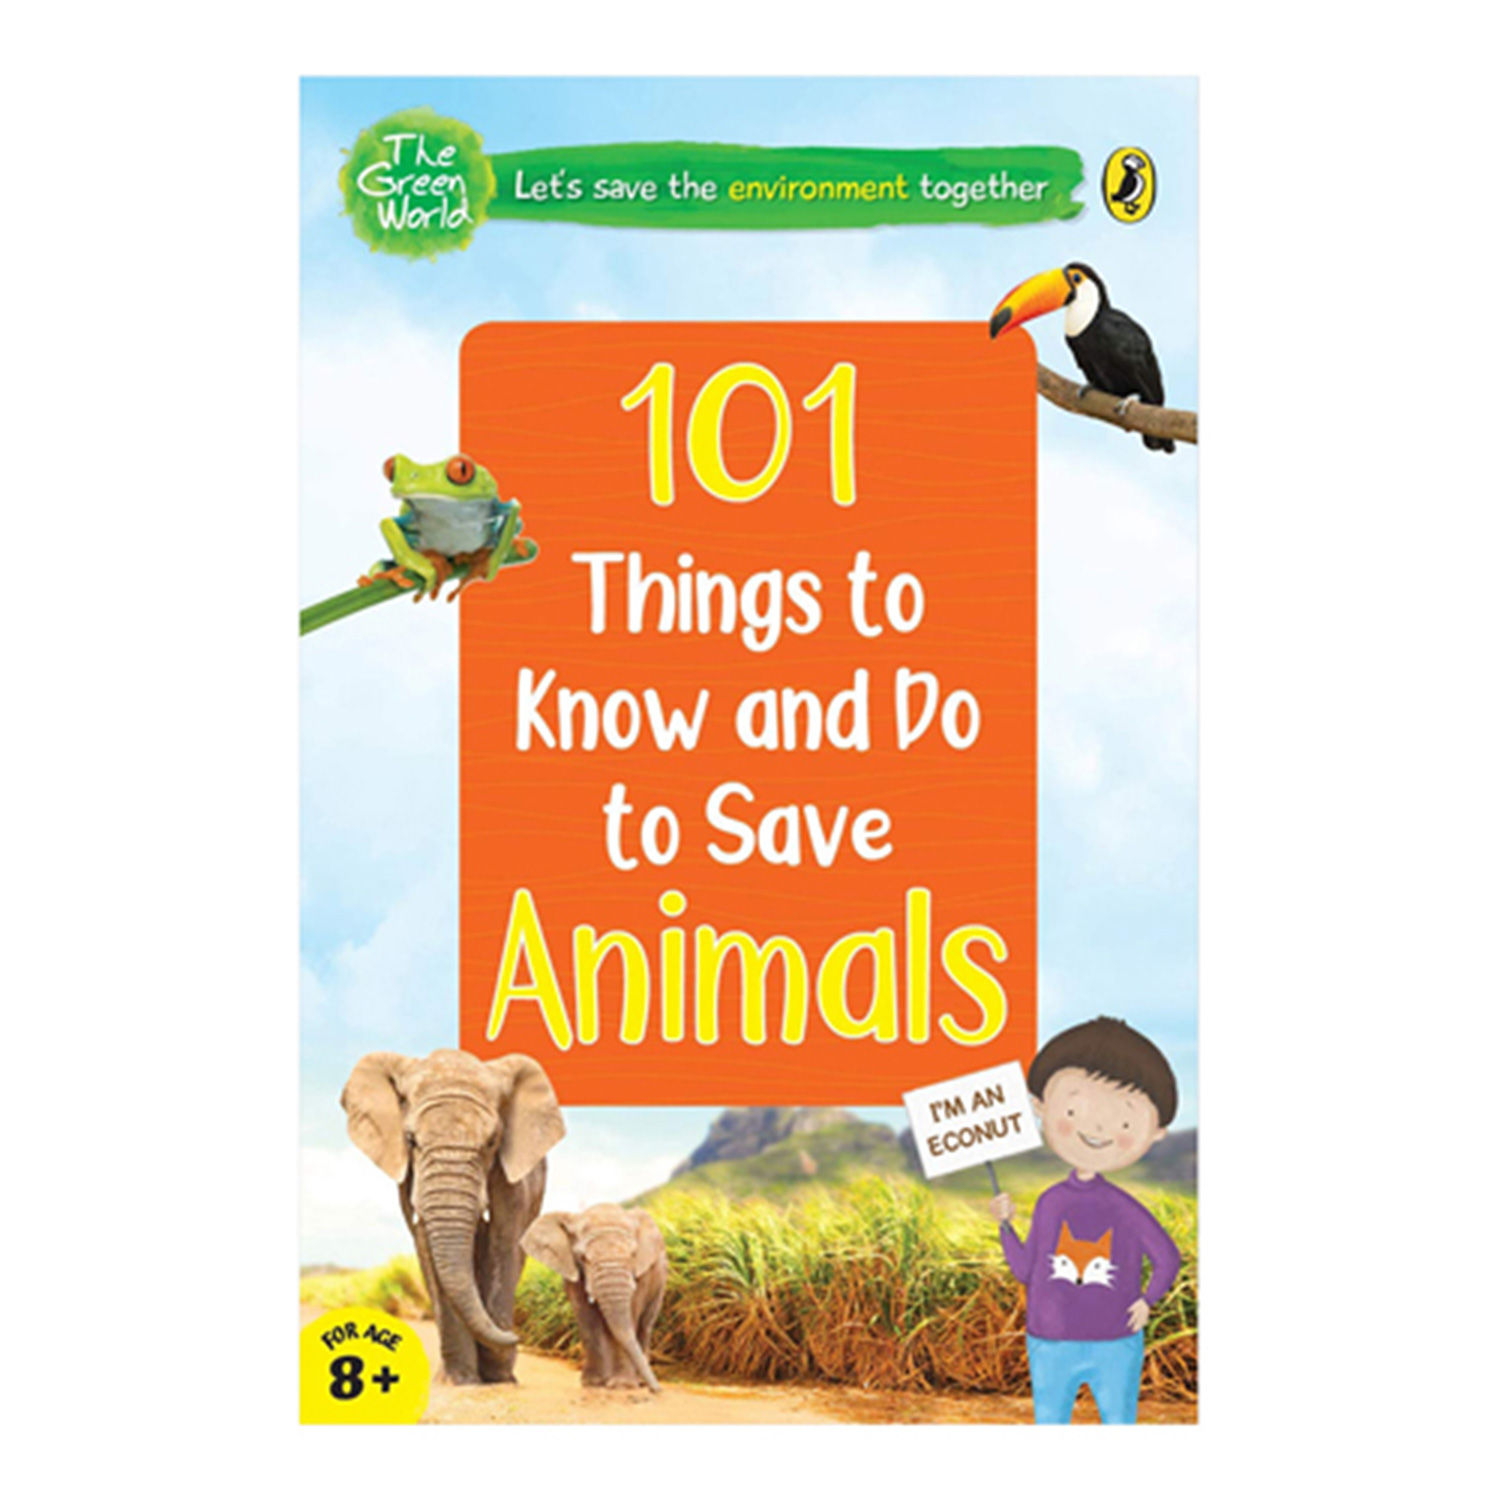 Buy/Send 101 Things To Know And Do- Let's Save Animals Online- FNP